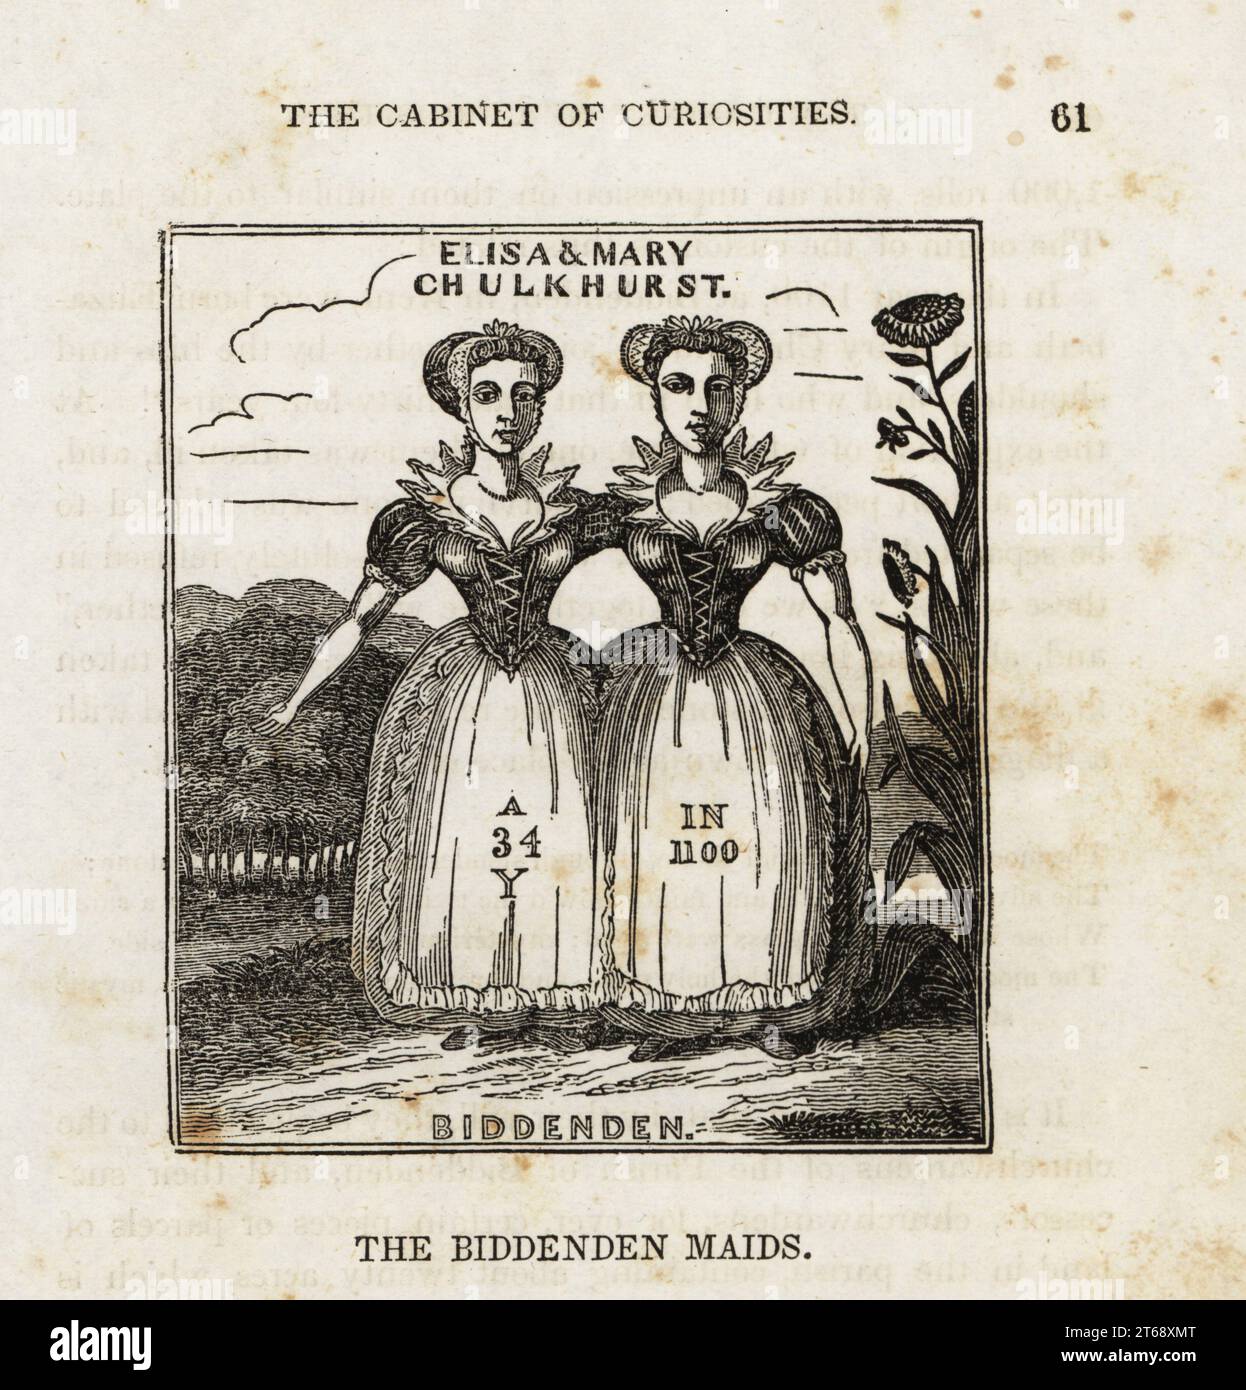 Elizabeth and Mary Chulkhurst, the Biddenden Maids, died aged 34 in 1100. Legendary 11th century conjoined twins or Siamese twins from Kent, England. Woodcut from The Cabinet of Curiosities, or Wonders of the World Displayed, Henry Piercy, New York, 1836. Stock Photo